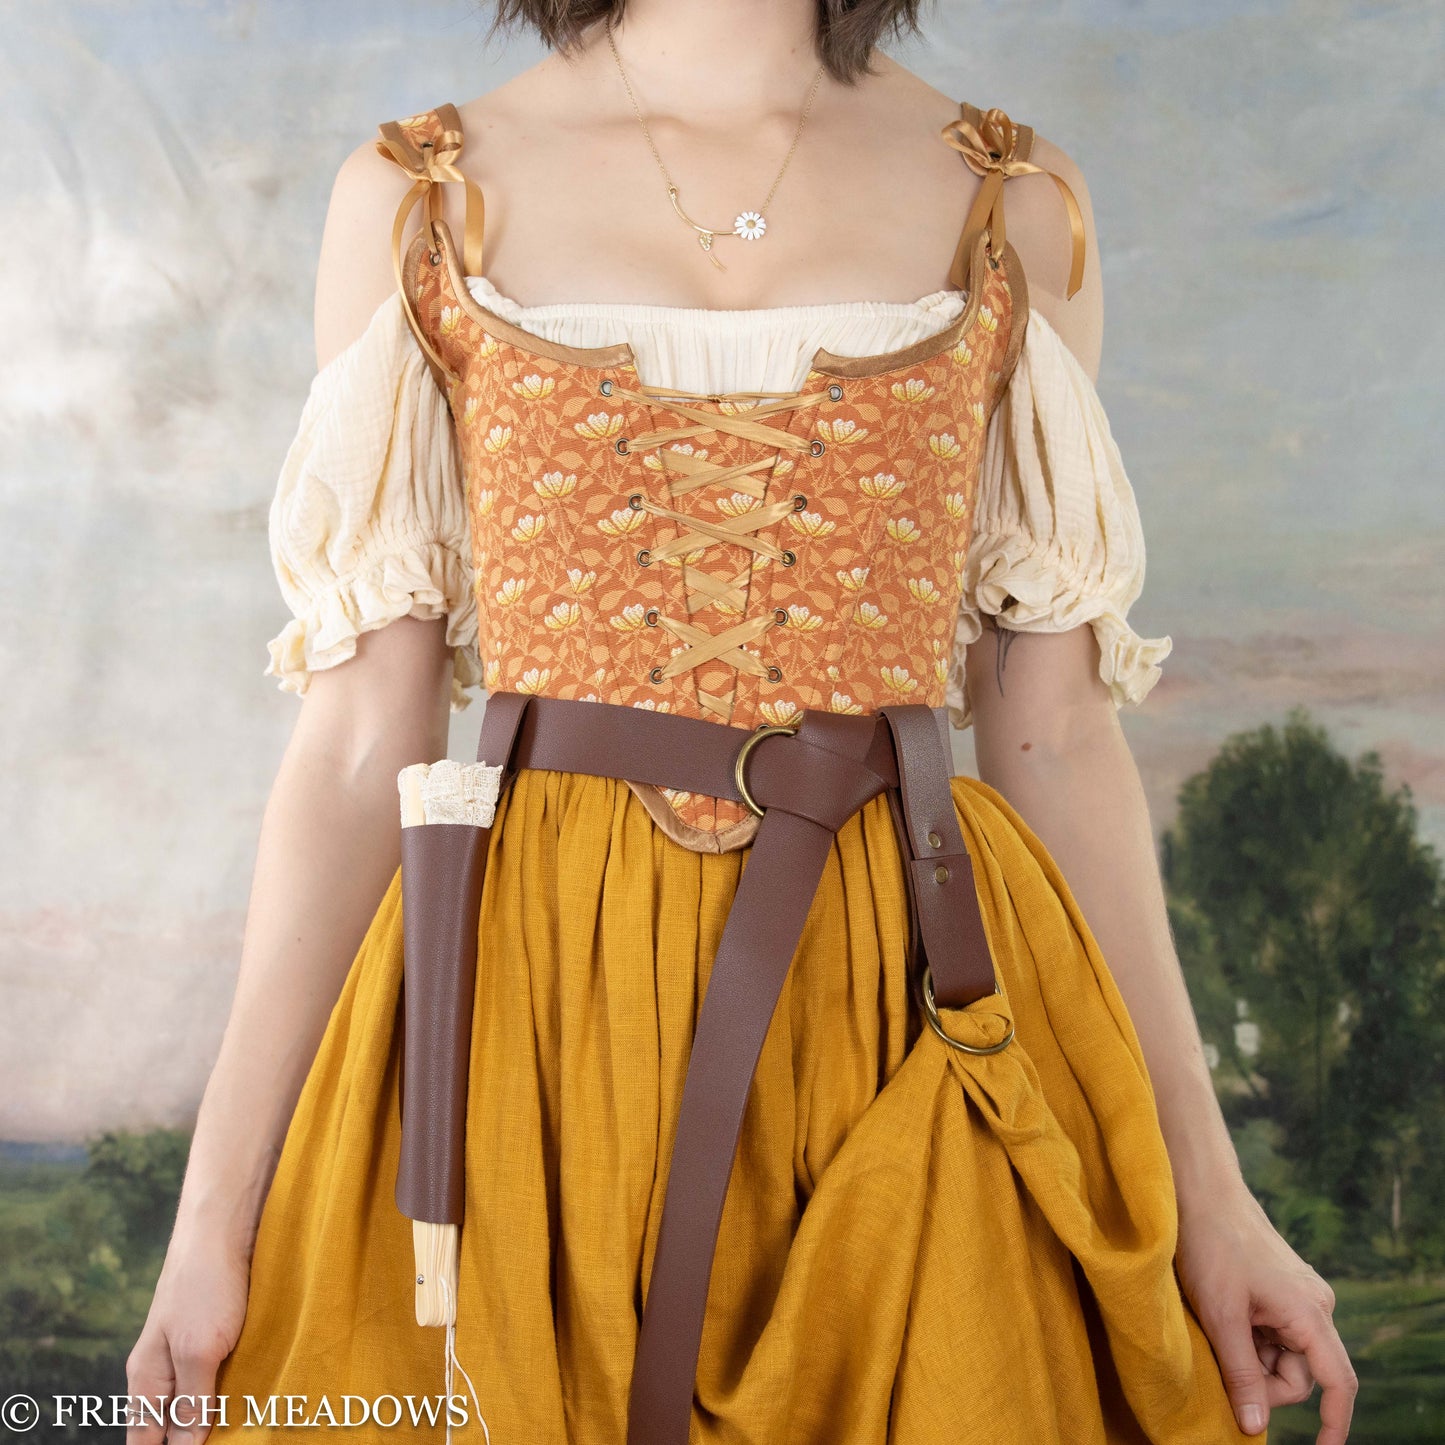 Load image into Gallery viewer, a renaissance faire costume including an orange corset, yellow linen skirt, and leather belt accessories
